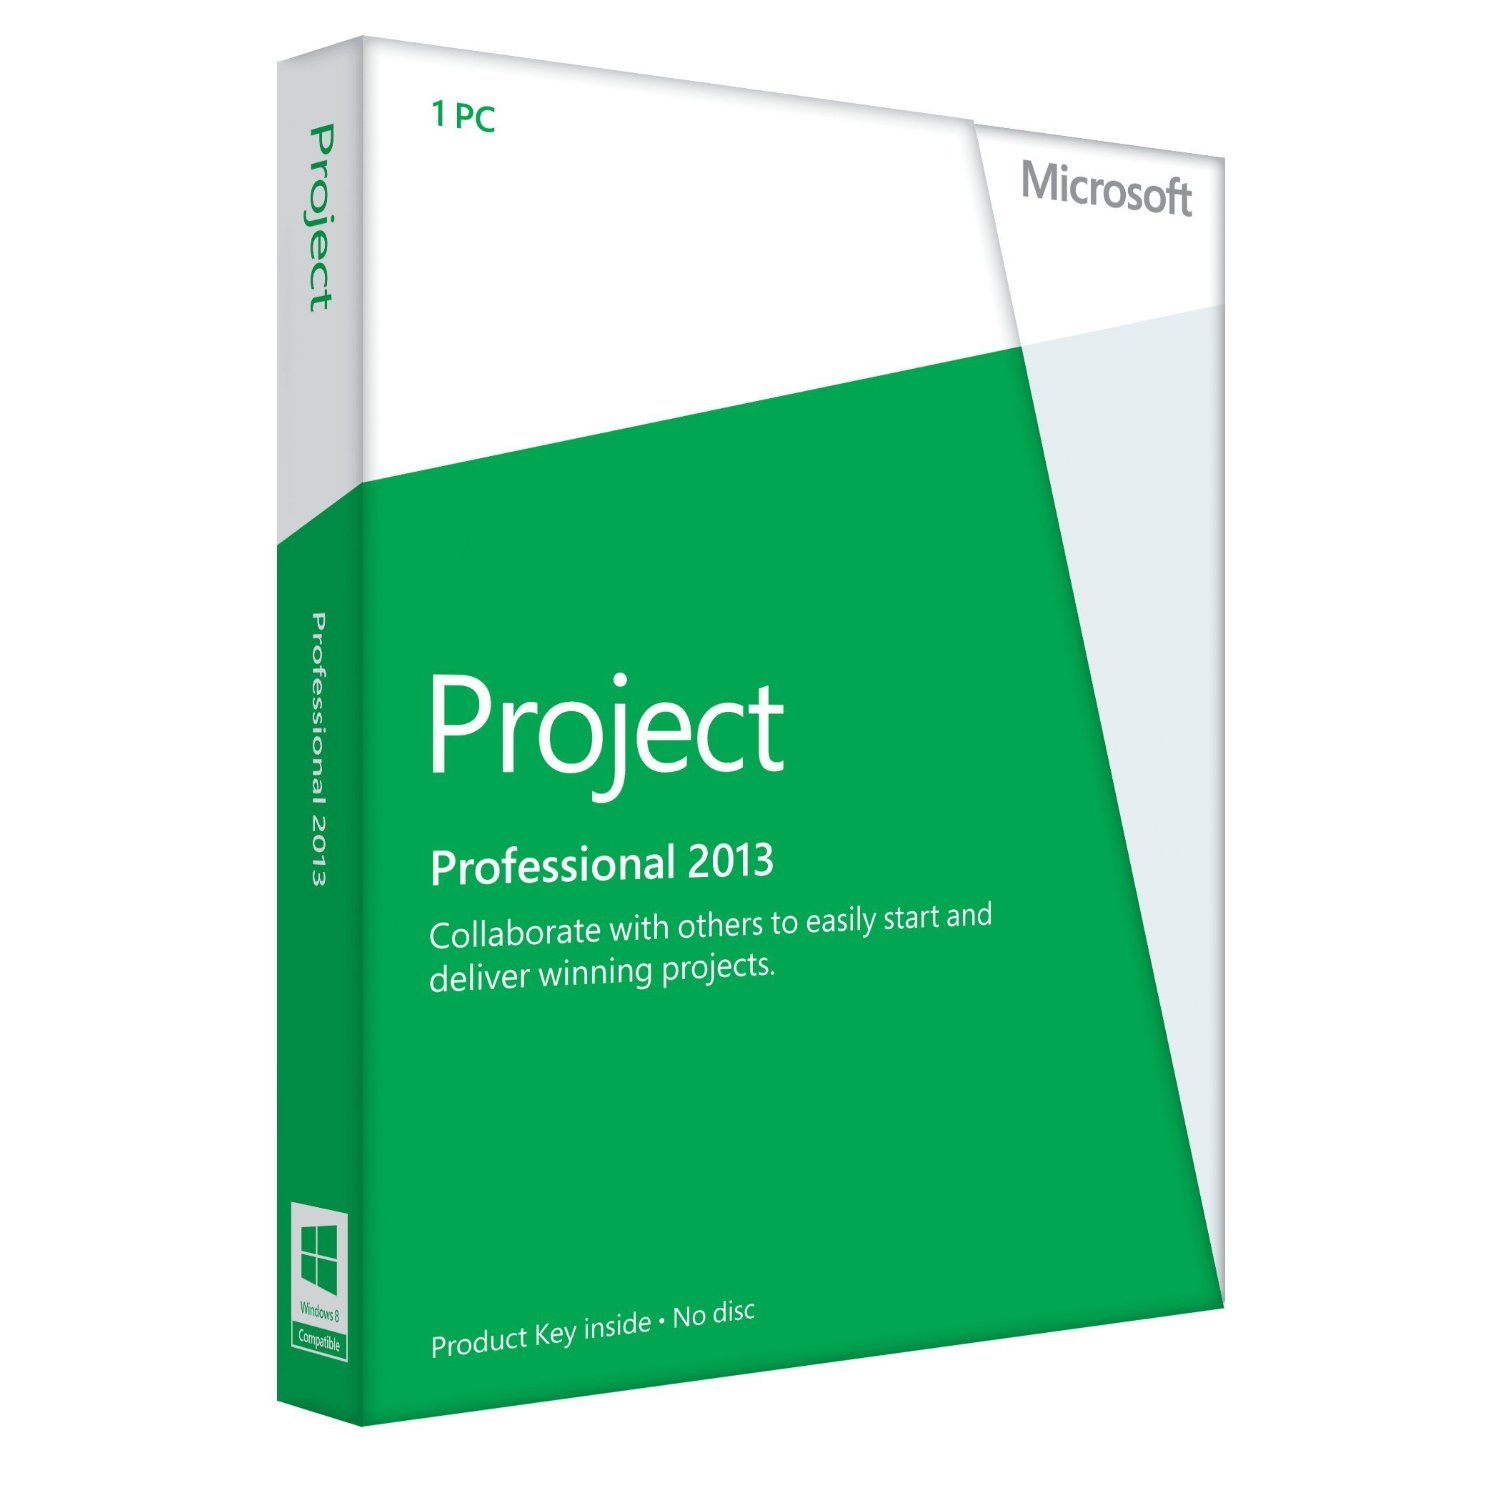 Prof Project Gampo Free Download